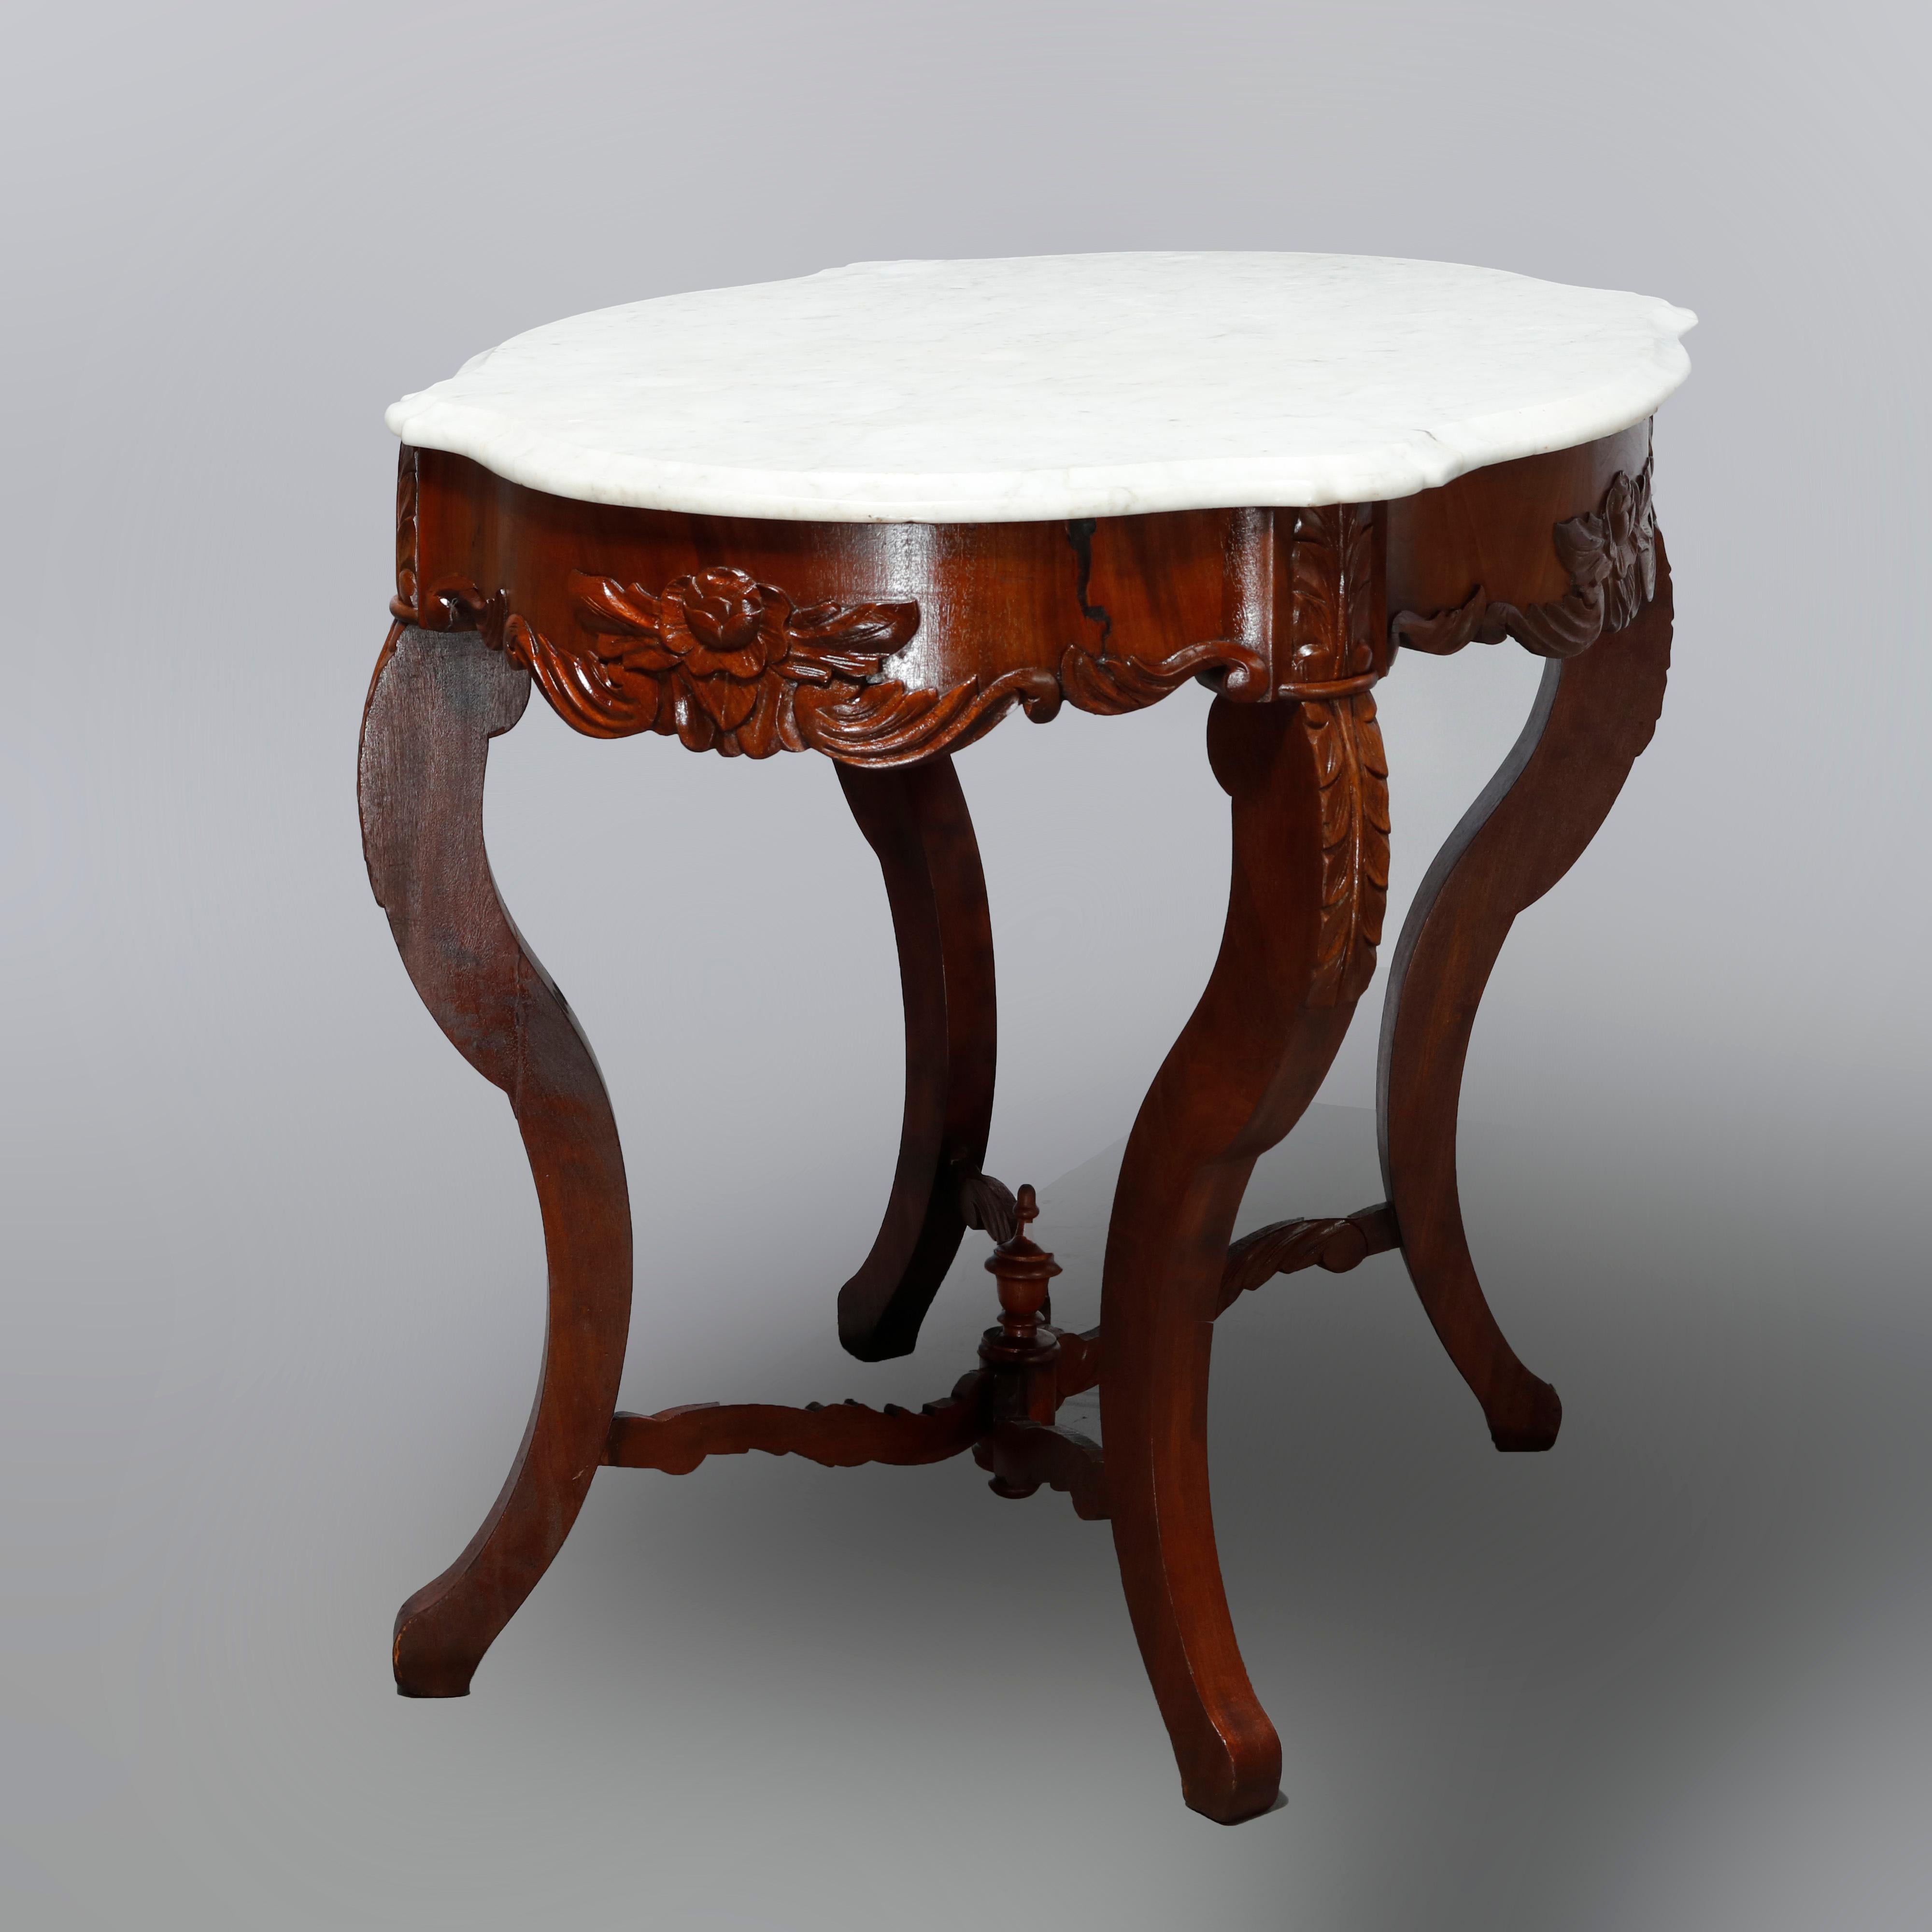 Antique Victorian Turtle Top Marble Top Mahogany & Walnut Lamp Table, Circa 1860 For Sale 4